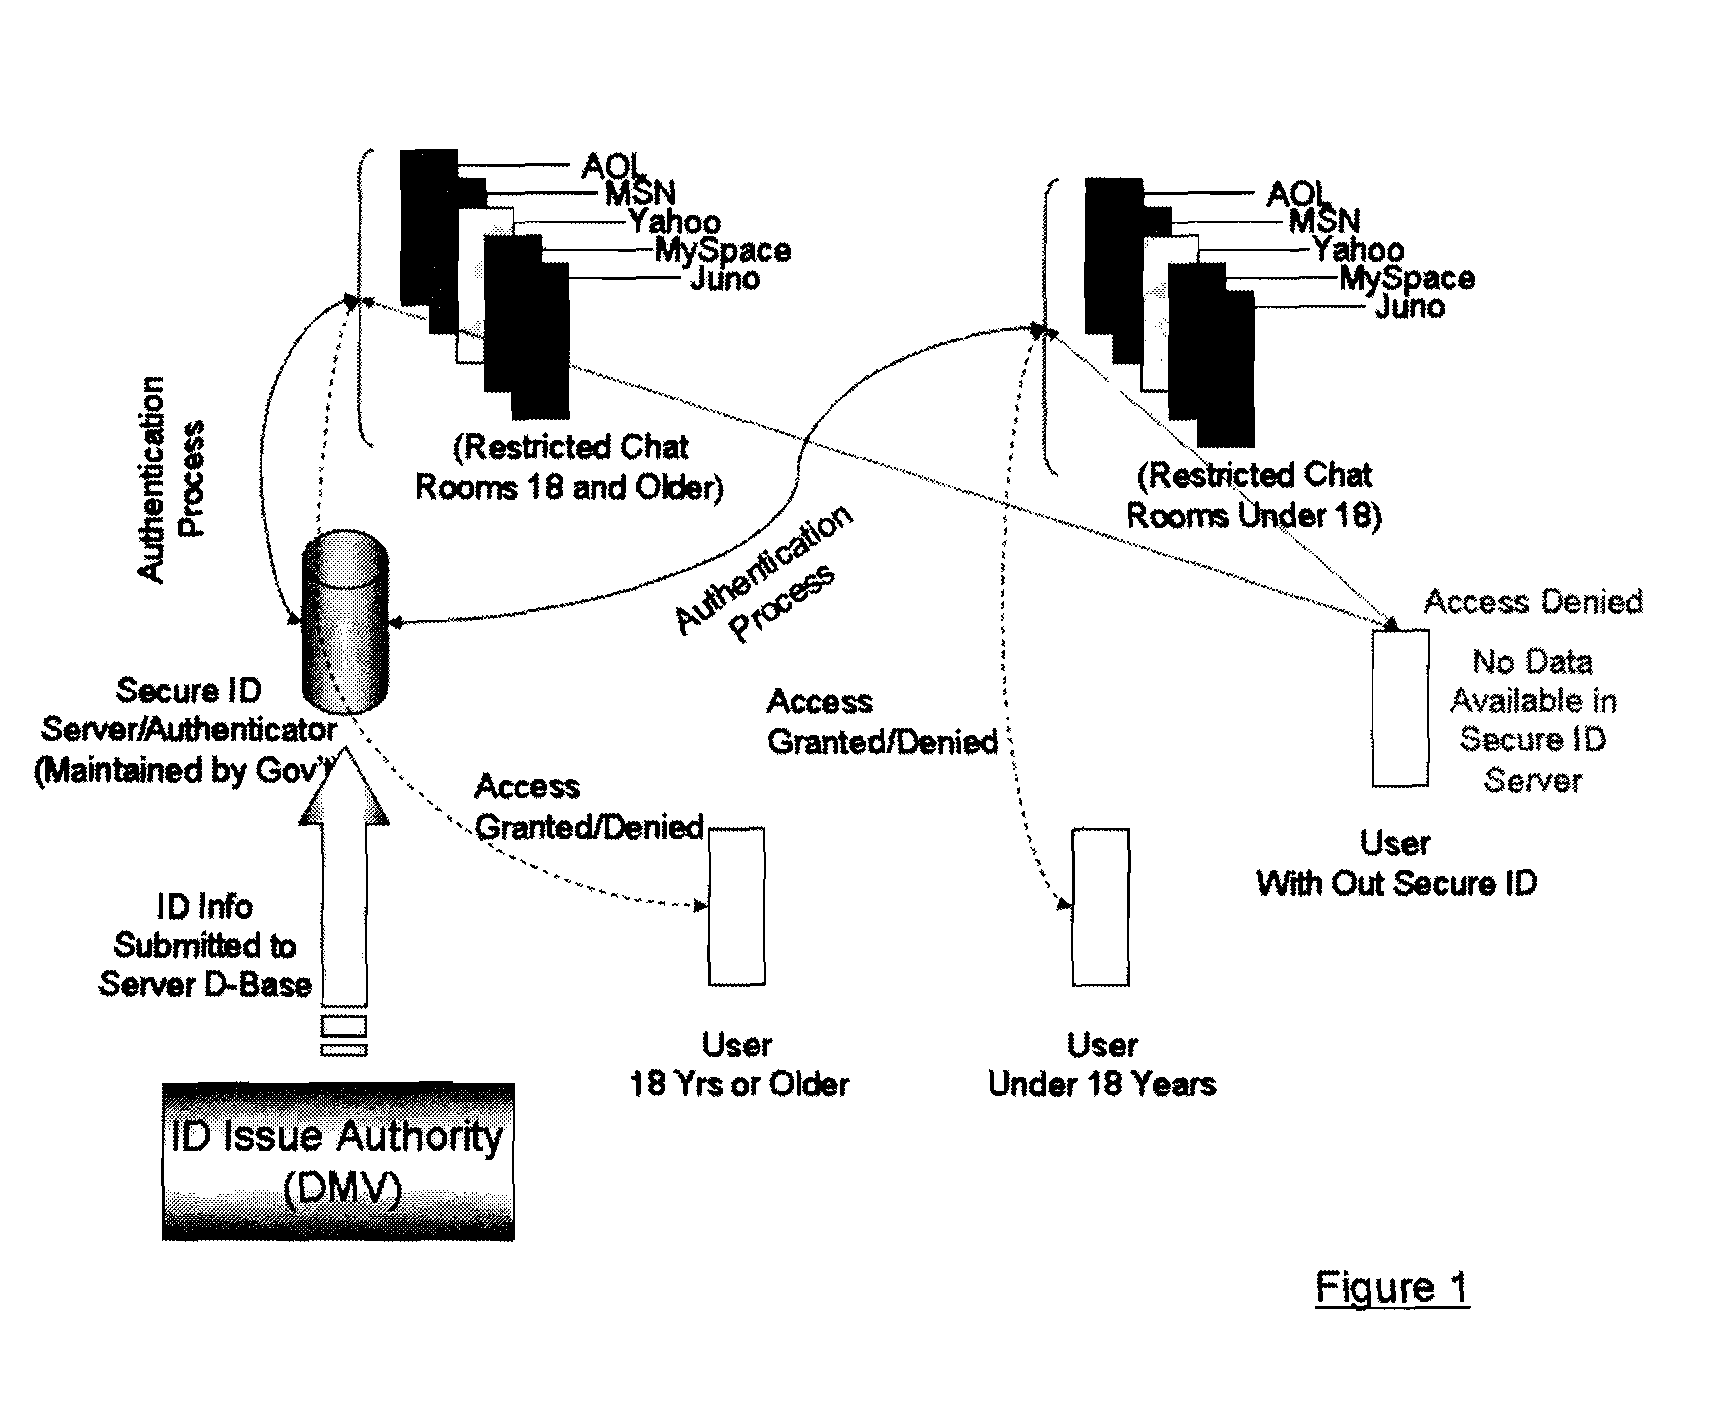 Method For Automatically Controlling Access To Internet Chat Rooms